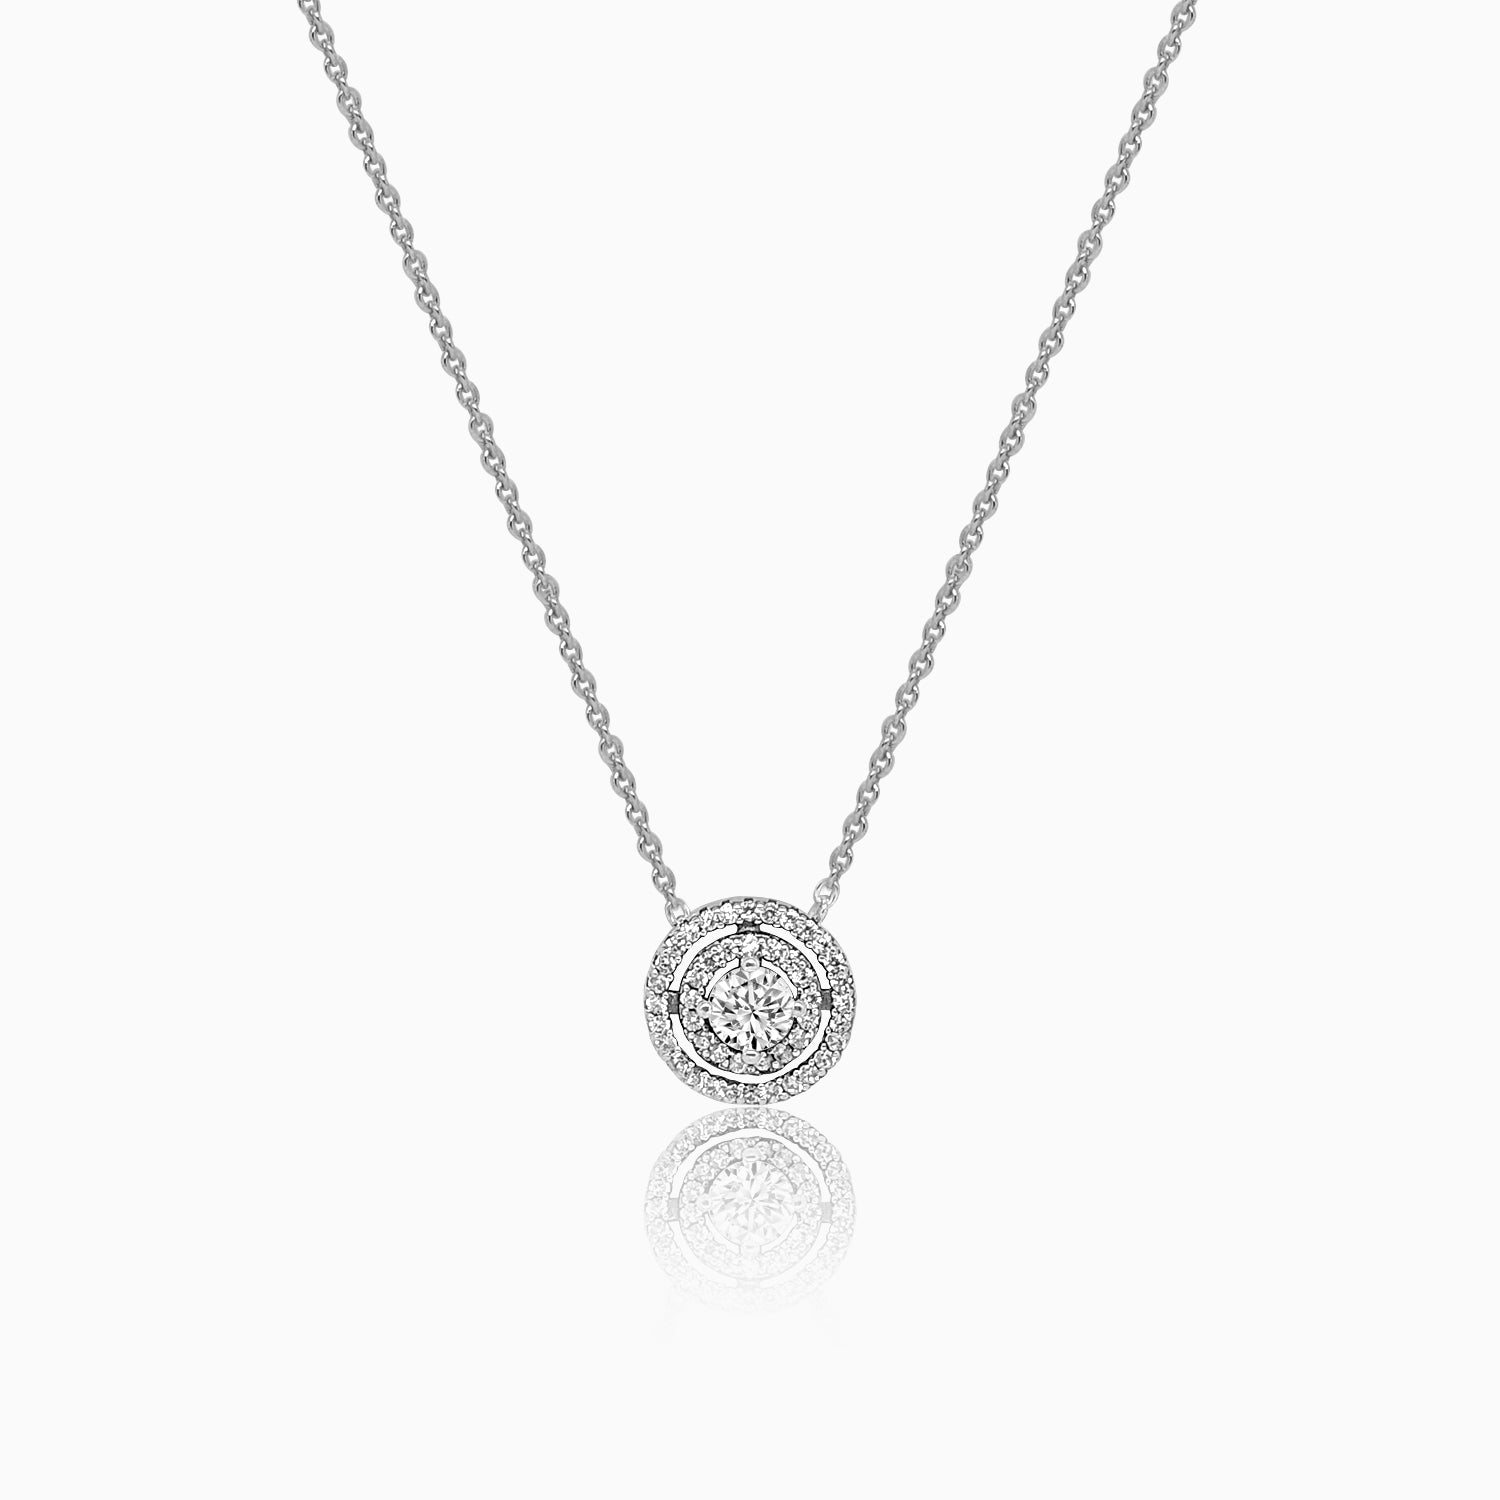 Silver Sparkling Two Row and Center Necklace 44cm + 5cm